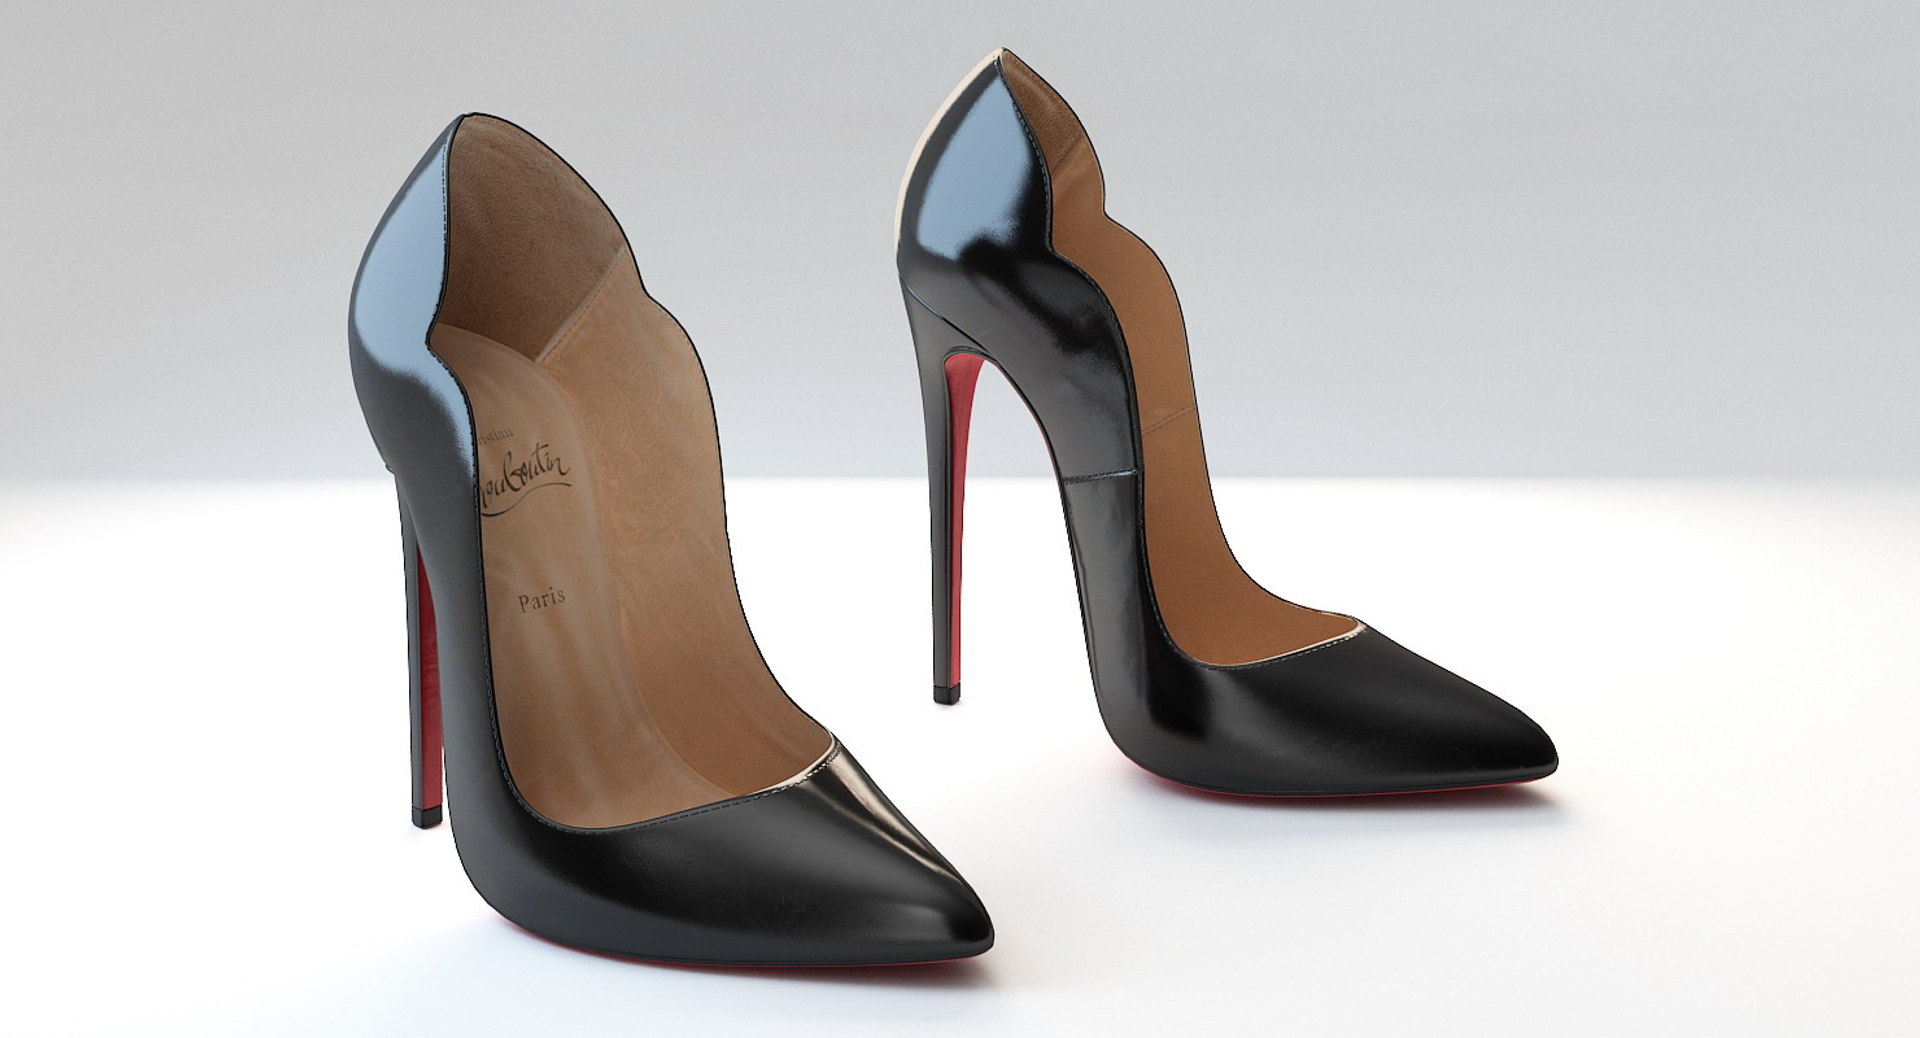 3D model Christian Louboutin So Kate 120mm Black and White Pumps